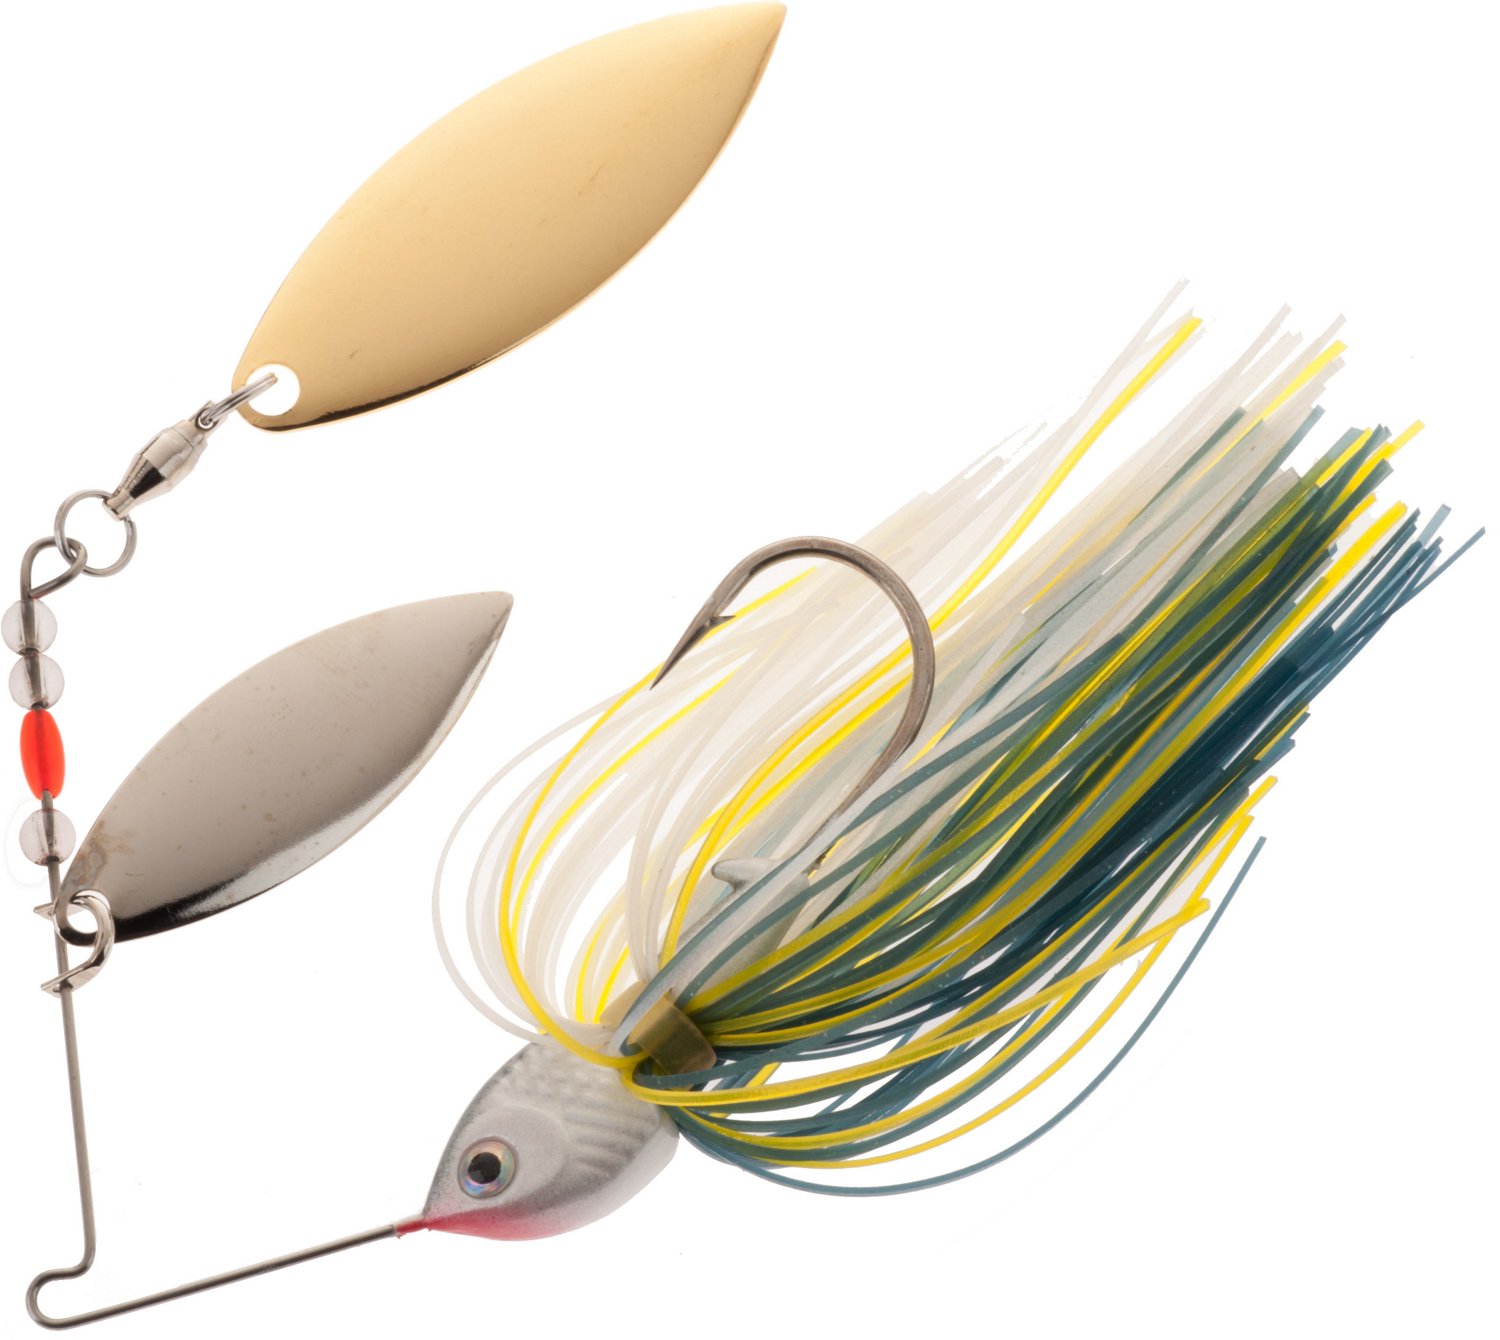 Favorite H20 express lure from Academy? - Fishing Tackle - Bass